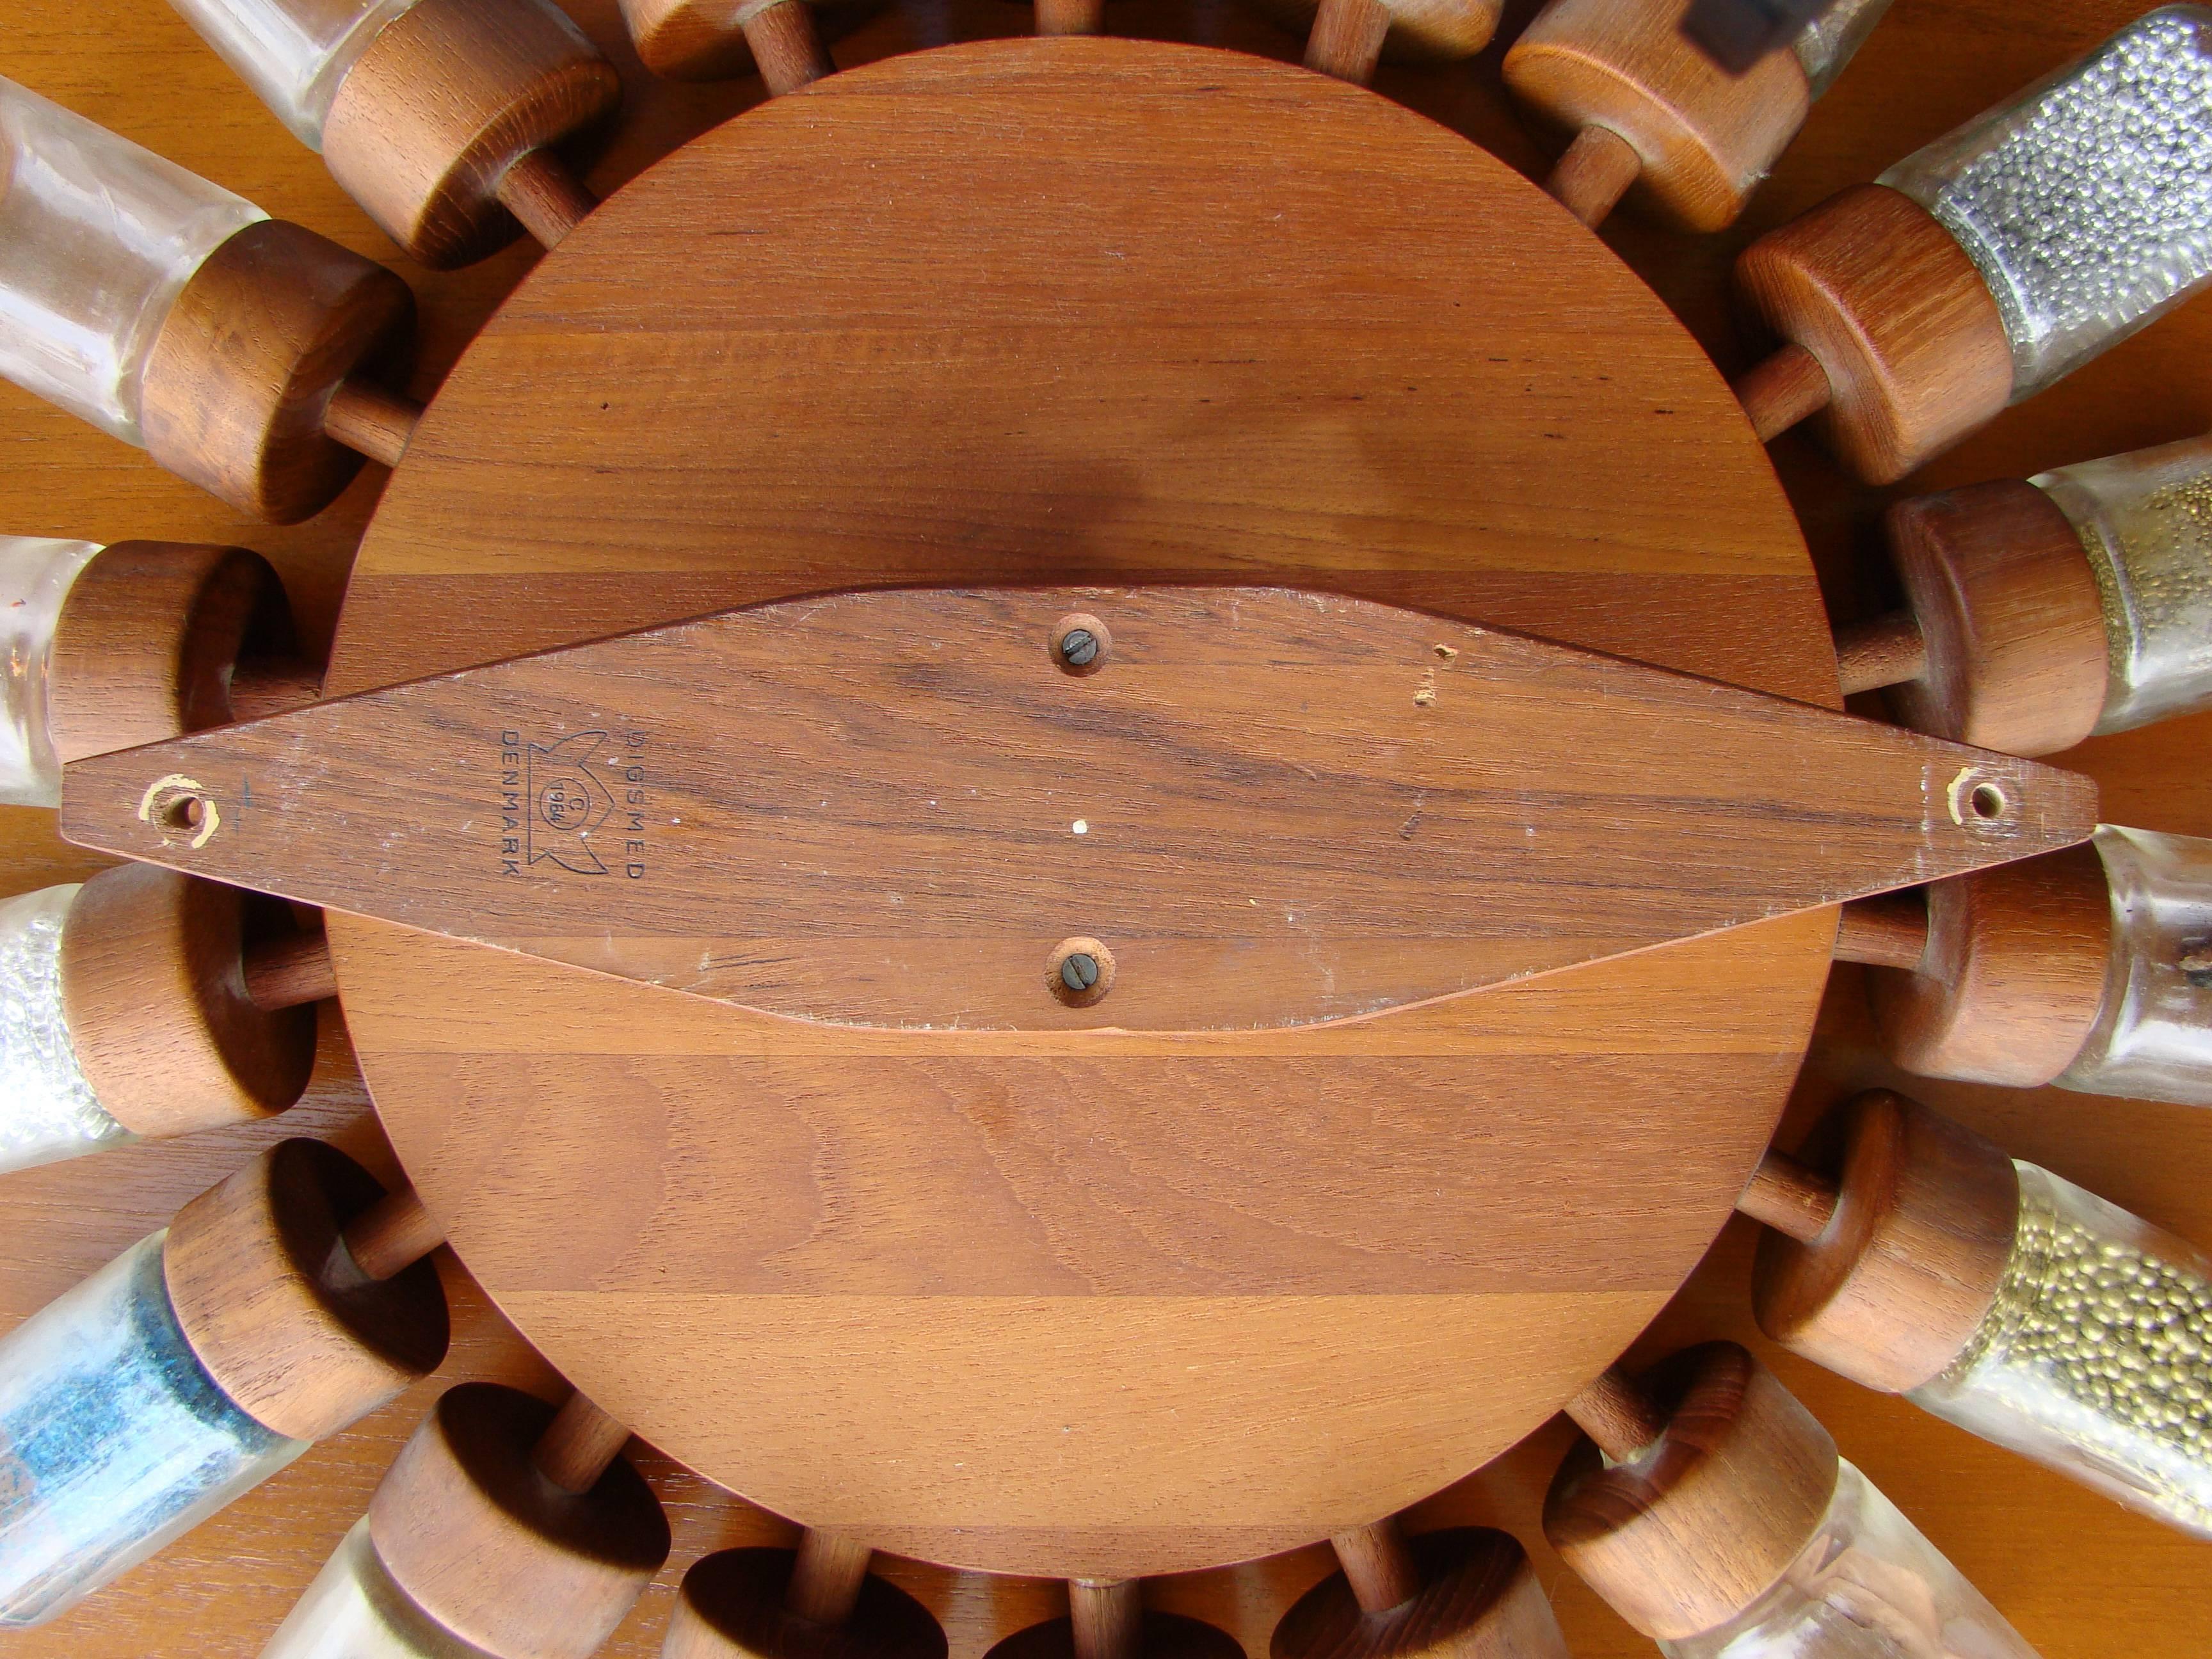 Mid-20th Century Danish Modern Teak Wall Mount Spinning Spice Rack by Digsmed, Denmark, 1964 For Sale